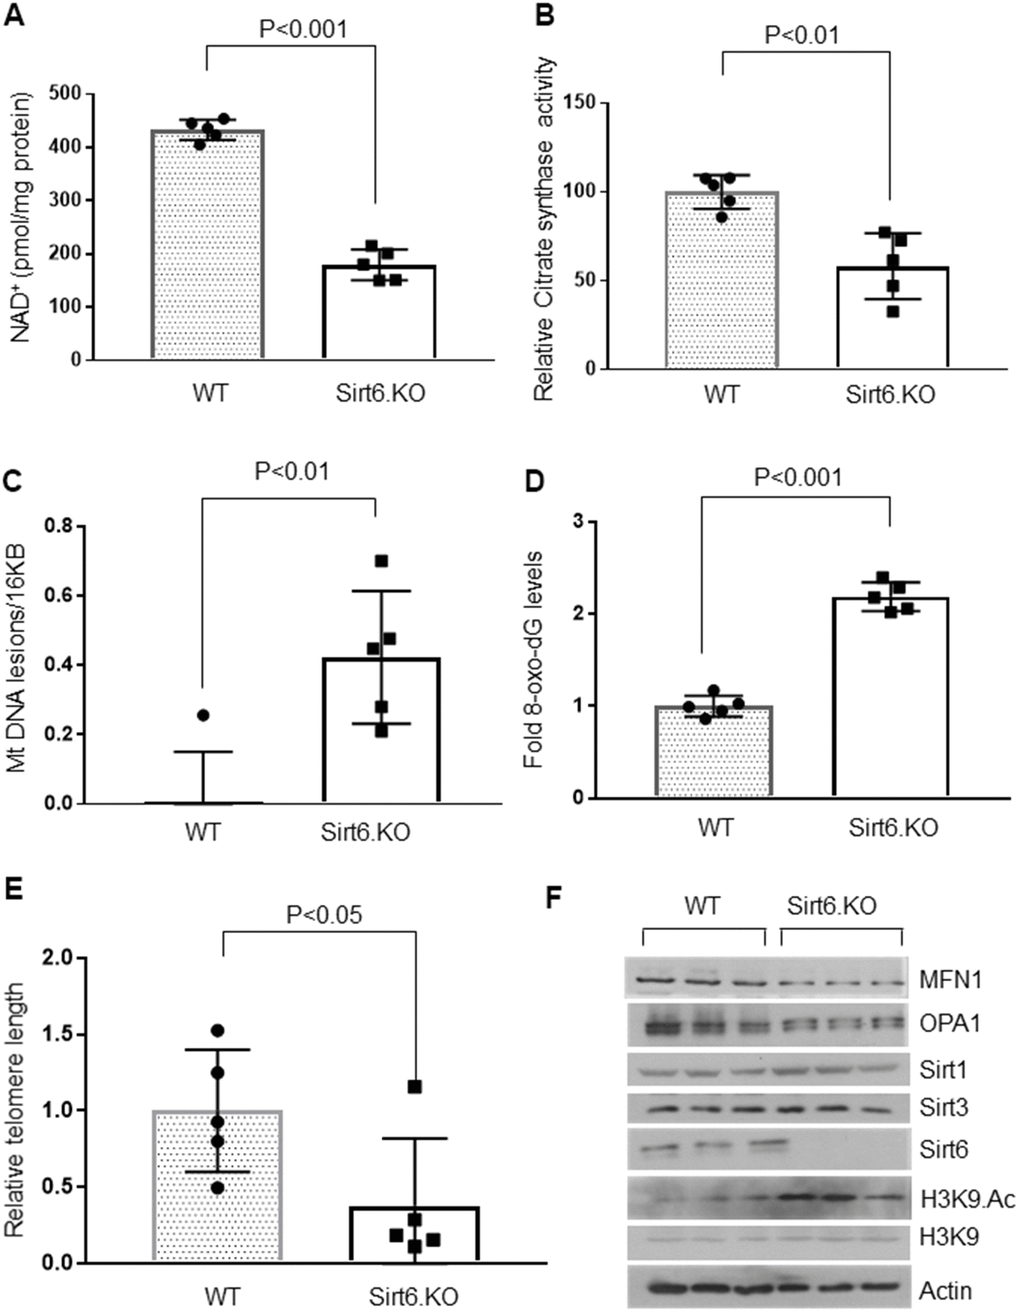 Sirt6.KO mice display cardiac aging phenotype. (A) Quantification of NAD+ contents in the heart lysate of wild type and Sirt6.KO mice. Values are mean ± SE, n = 5. (B) Relative Mitochondrial citrate synthase activity in the heart of Wild type and Sirt6.KO mice. Values are mean ± SE, n = 5. (C) Relative mitochondrial DNA lesions in the heart of Wild type and Sirt6.KO mice. Values are mean ± SE, n = 5. (D) 8-Oxo-dG content in the DNA of the whole heart of Wild type and Sirt6.KO mice. Values are mean ± SE, n = 5. (E) Relative telomere length of Wild type and Sirt6.KO mice. Values are mean ± SE, n = 5. (F) Heart lysates of Wild type and Sirt6.KO mice were subjected to immunoblotting using indicated antibodies. Representative blots of three different mice in each group are shown, n = 6. (Quantification of blots is given in Supplementary Figure 4A–4E).